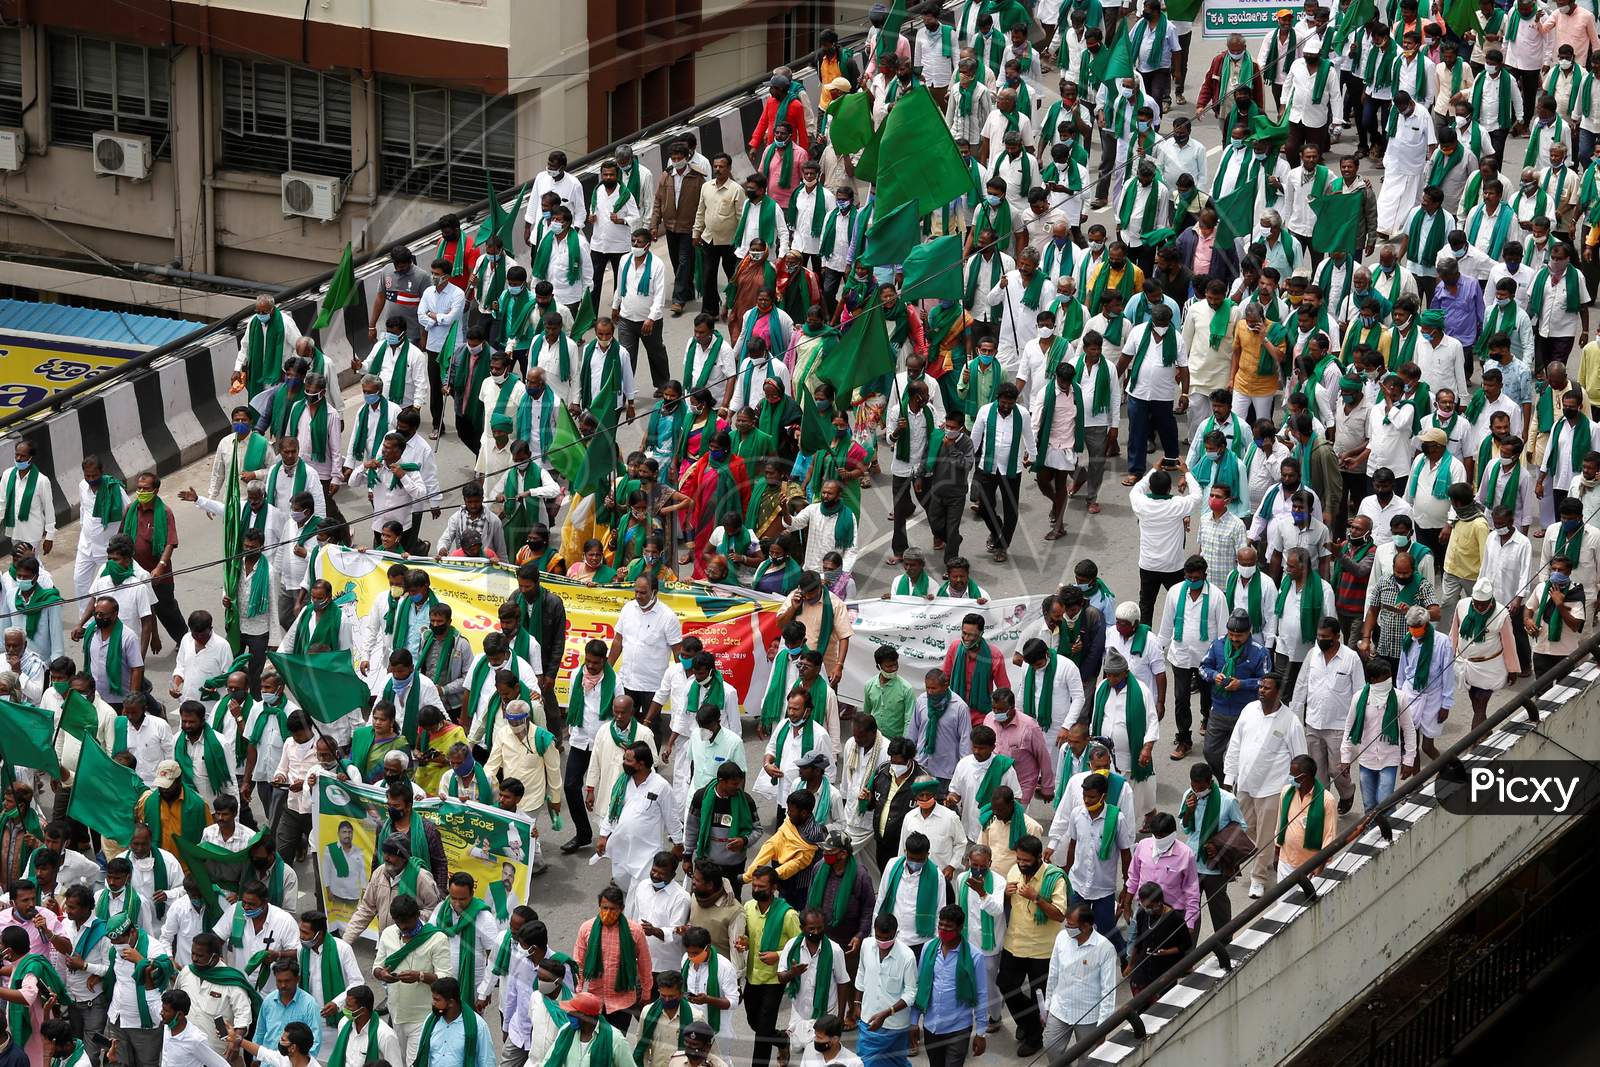 Farmers chant slogans against the government and protest against the passage of two controversial farm bills by the country’s parliament in Bangalore, India.